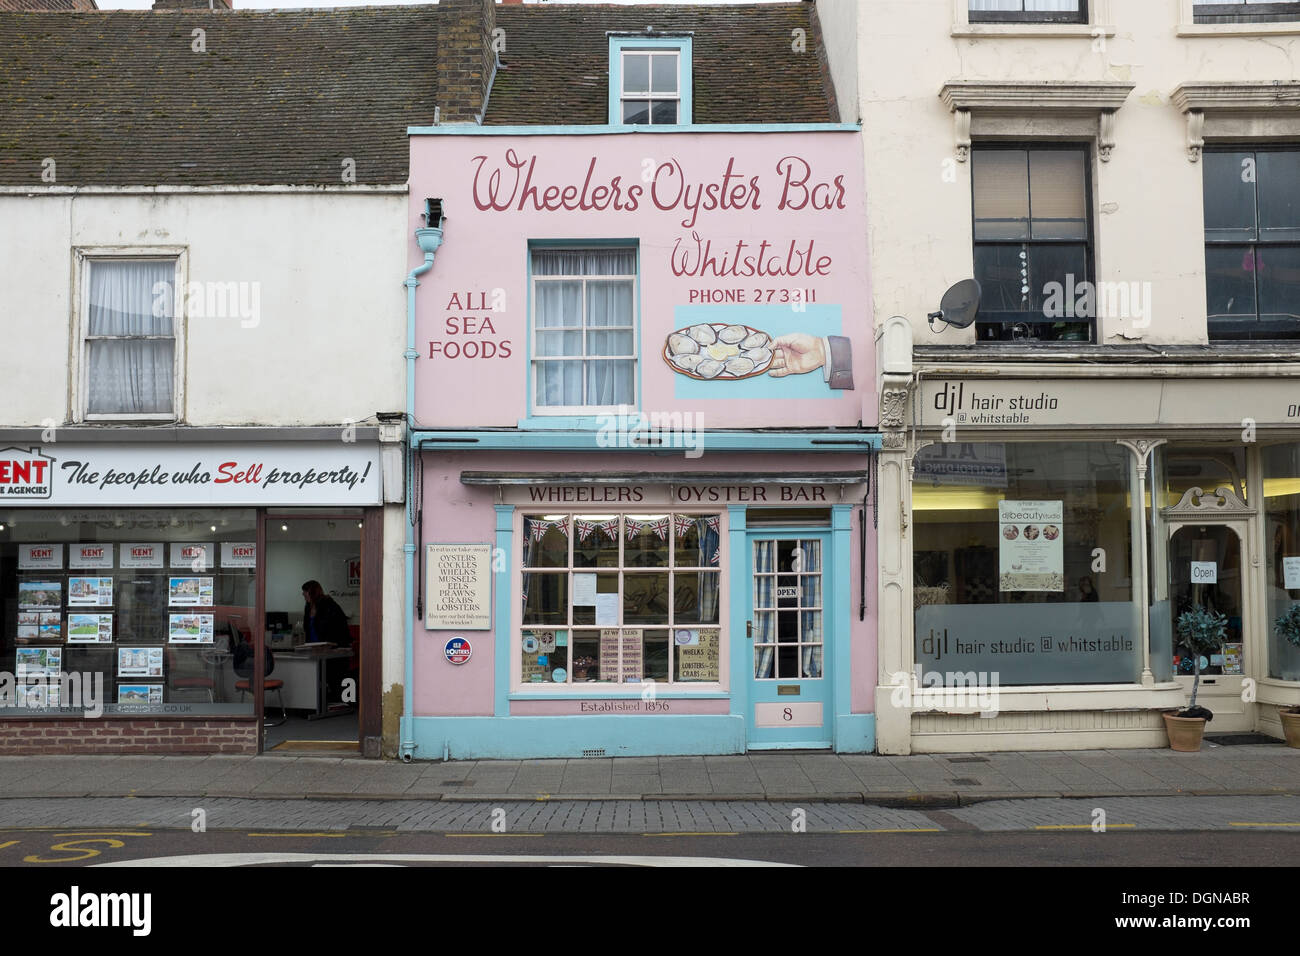 Wheelers Oyster Bar Whitstable Stock Photo